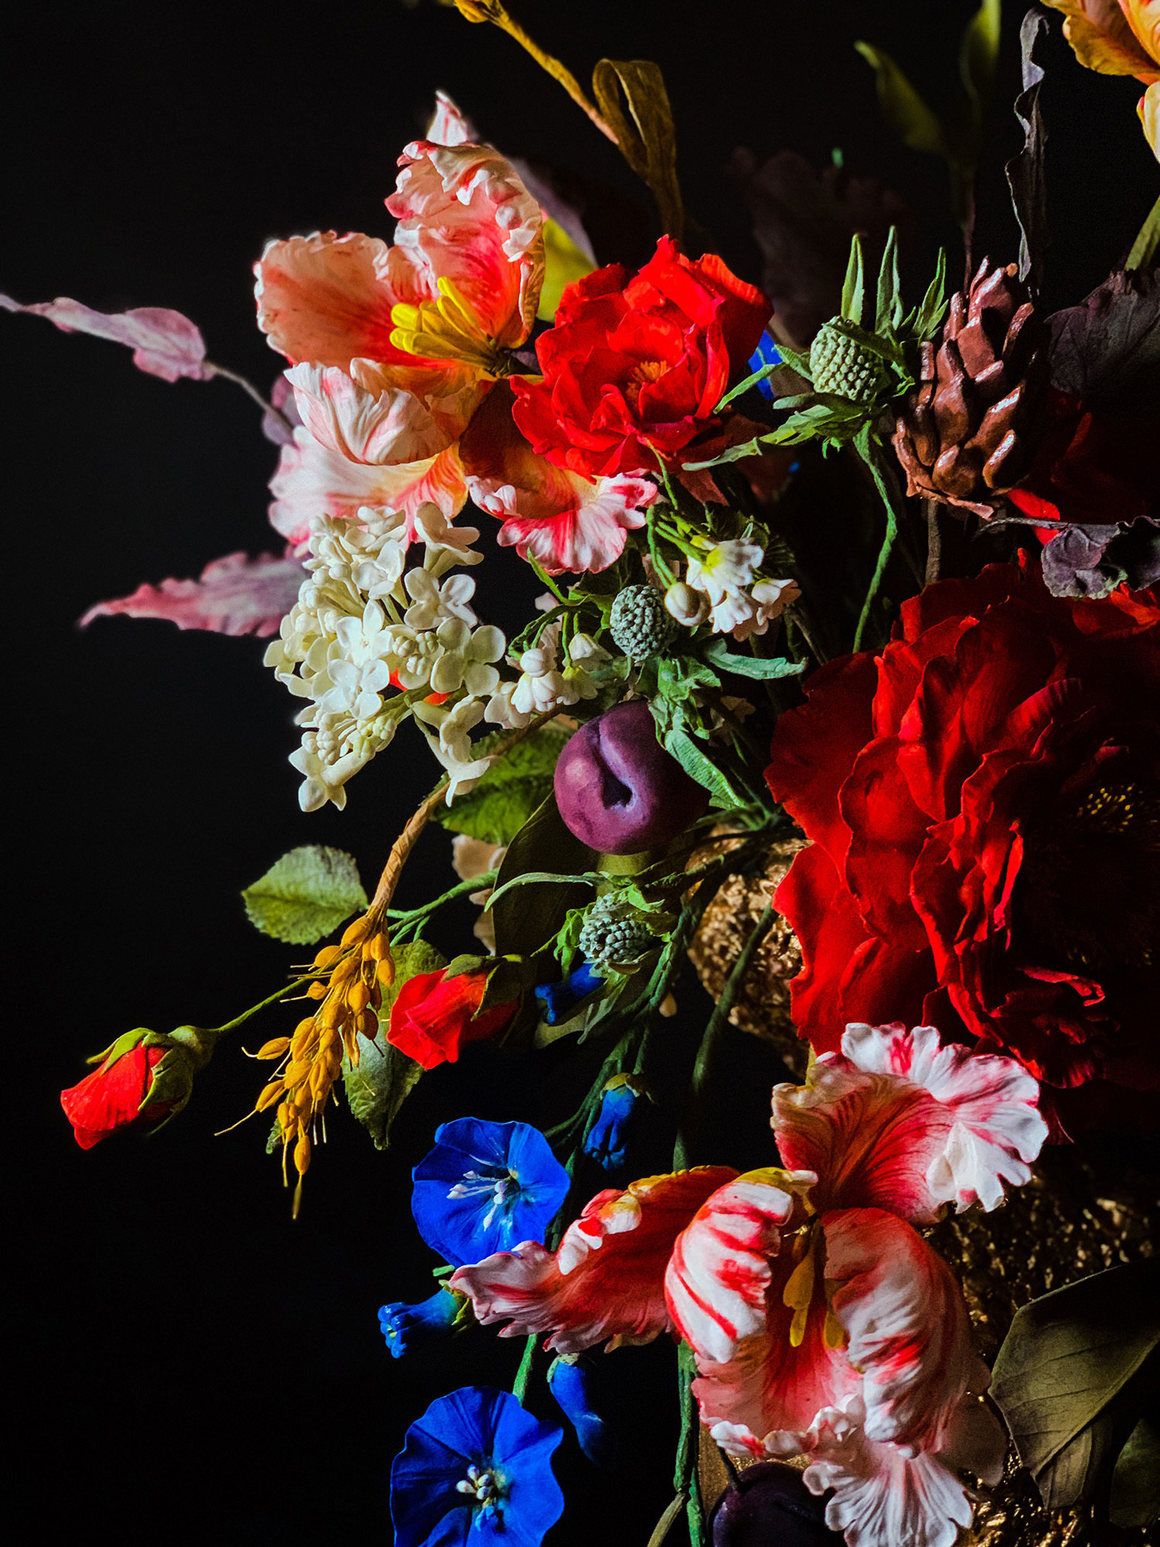 Simon's compositions are flights of floral fantasy. Here, a close-up of one such bouquet atop a cake.